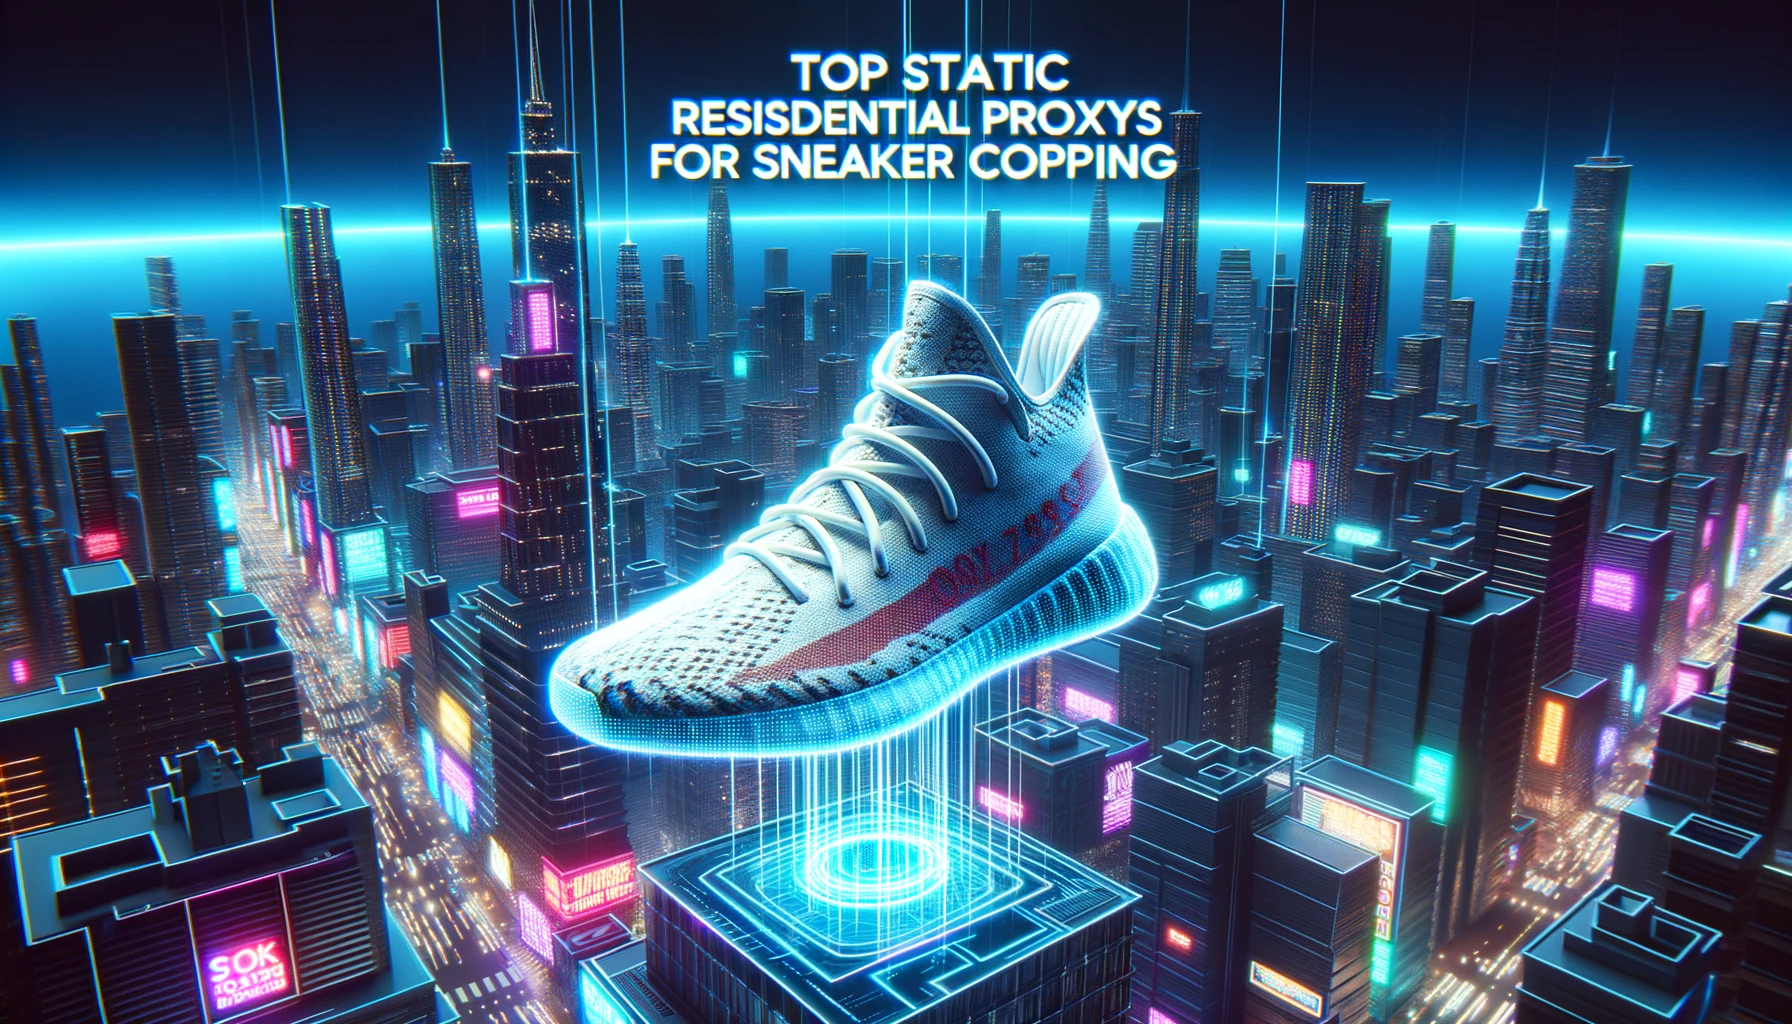 Top Static Residential Proxies For Sneaker Copping